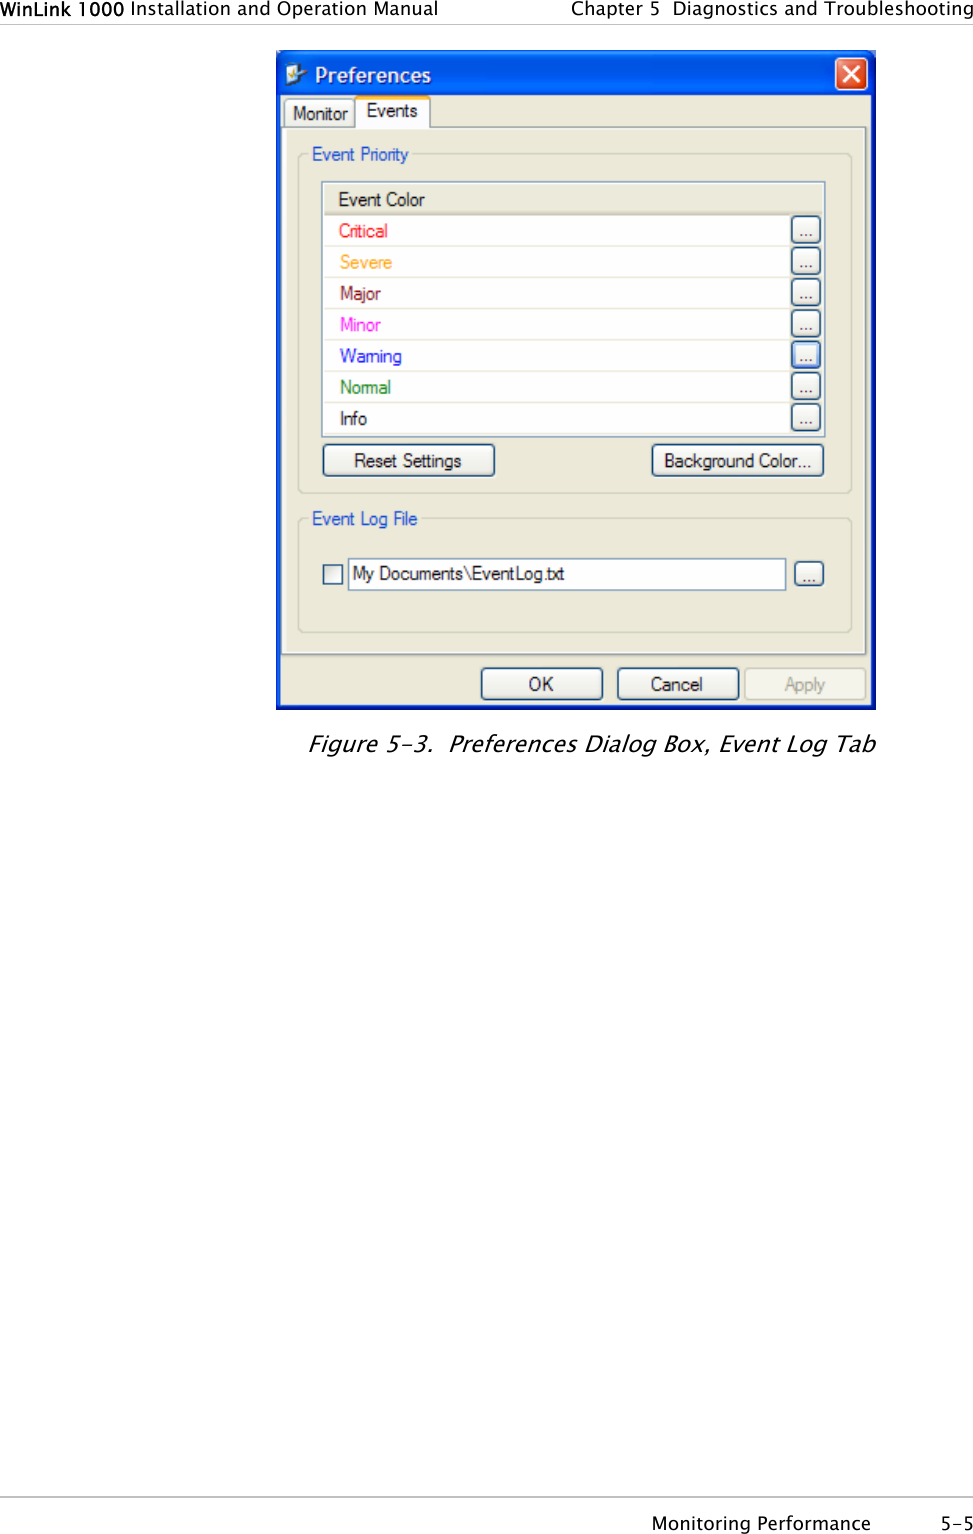 WinLink 1000 Installation and Operation Manual  Chapter  5  Diagnostics and Troubleshooting  Figure  5-3.  Preferences Dialog Box, Event Log Tab  Monitoring Performance  5-5 